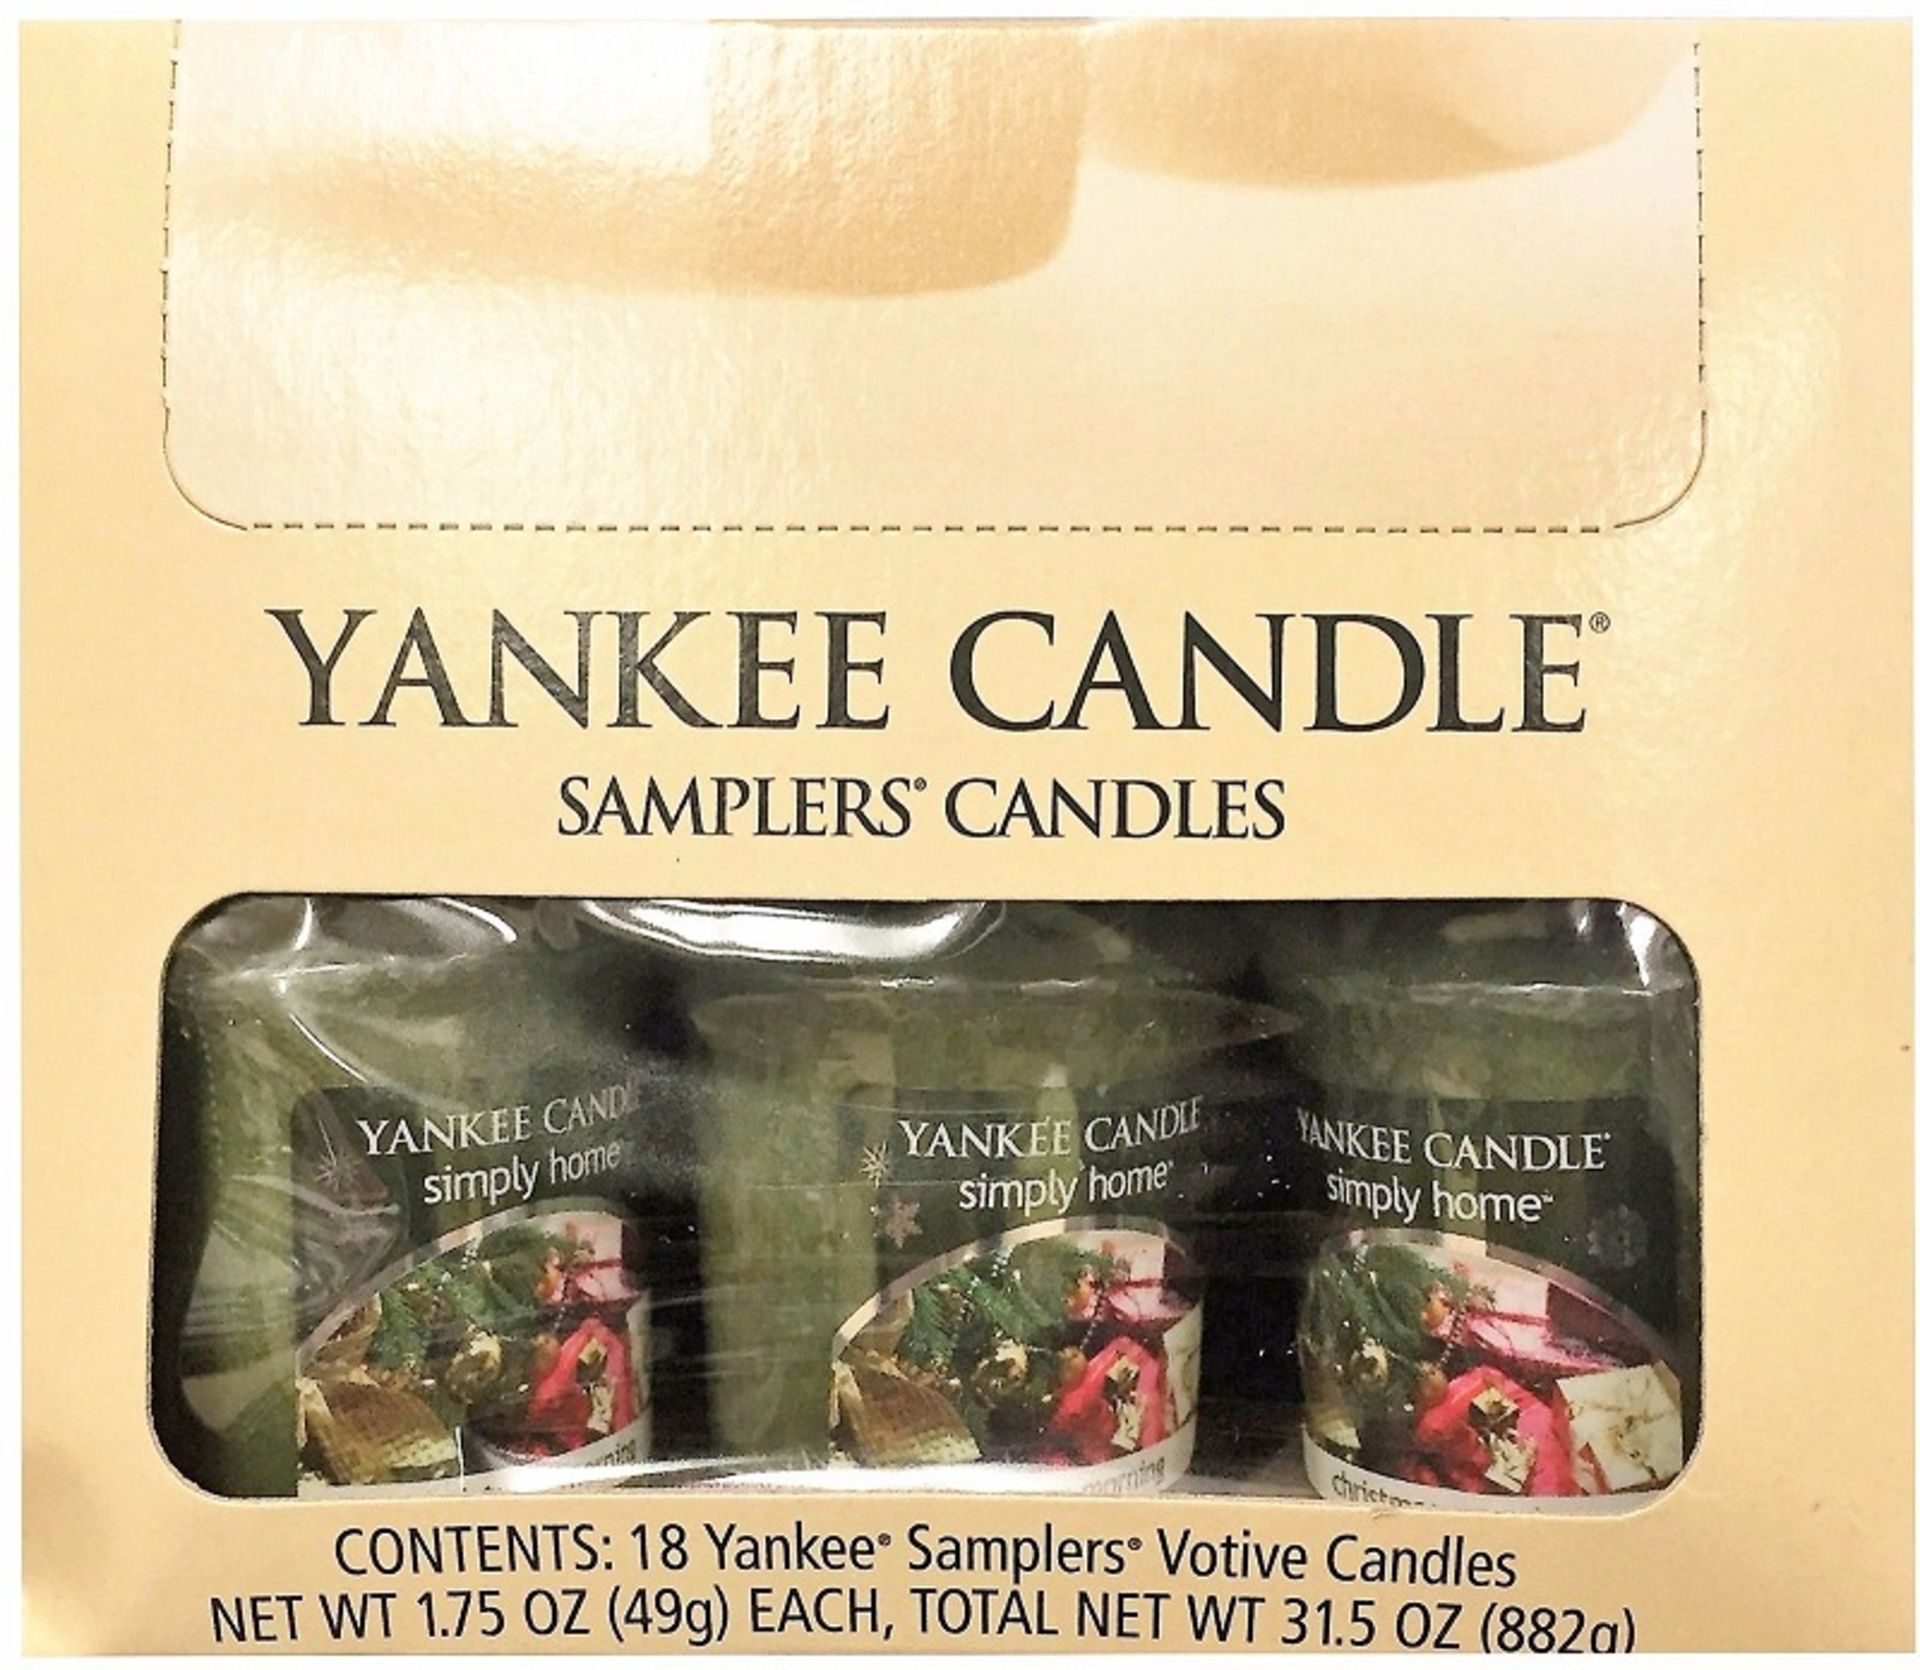 V *TRADE QTY* Brand New 18 x Yankee Candle Christmas Morning 49g eBay Price £19.99 X 3 YOUR BID - Image 2 of 2